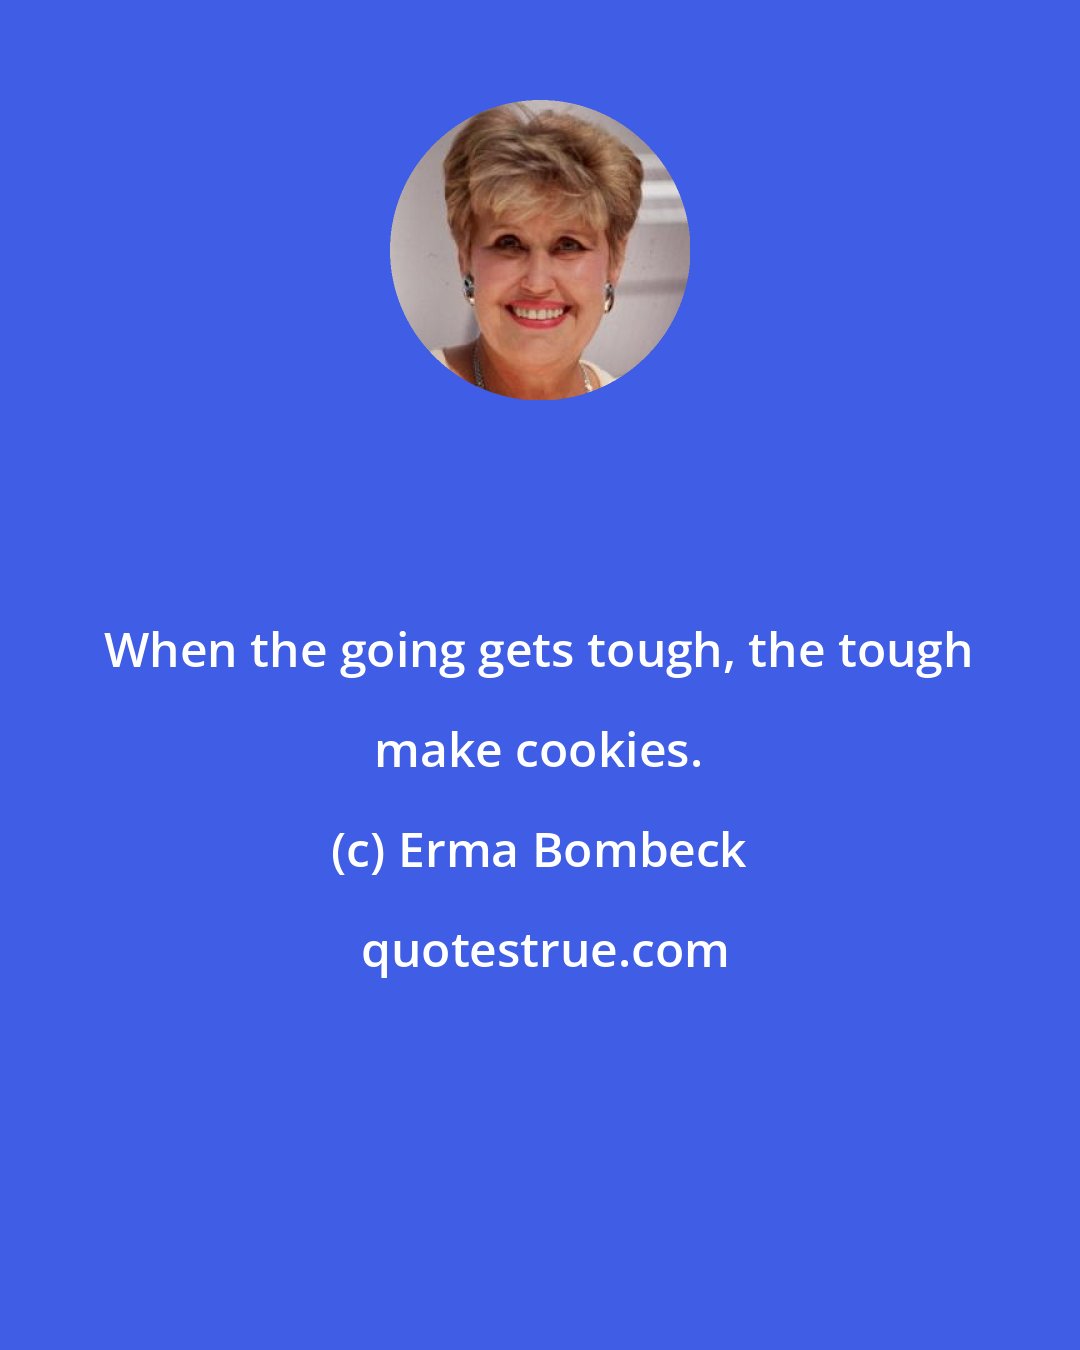 Erma Bombeck: When the going gets tough, the tough make cookies.